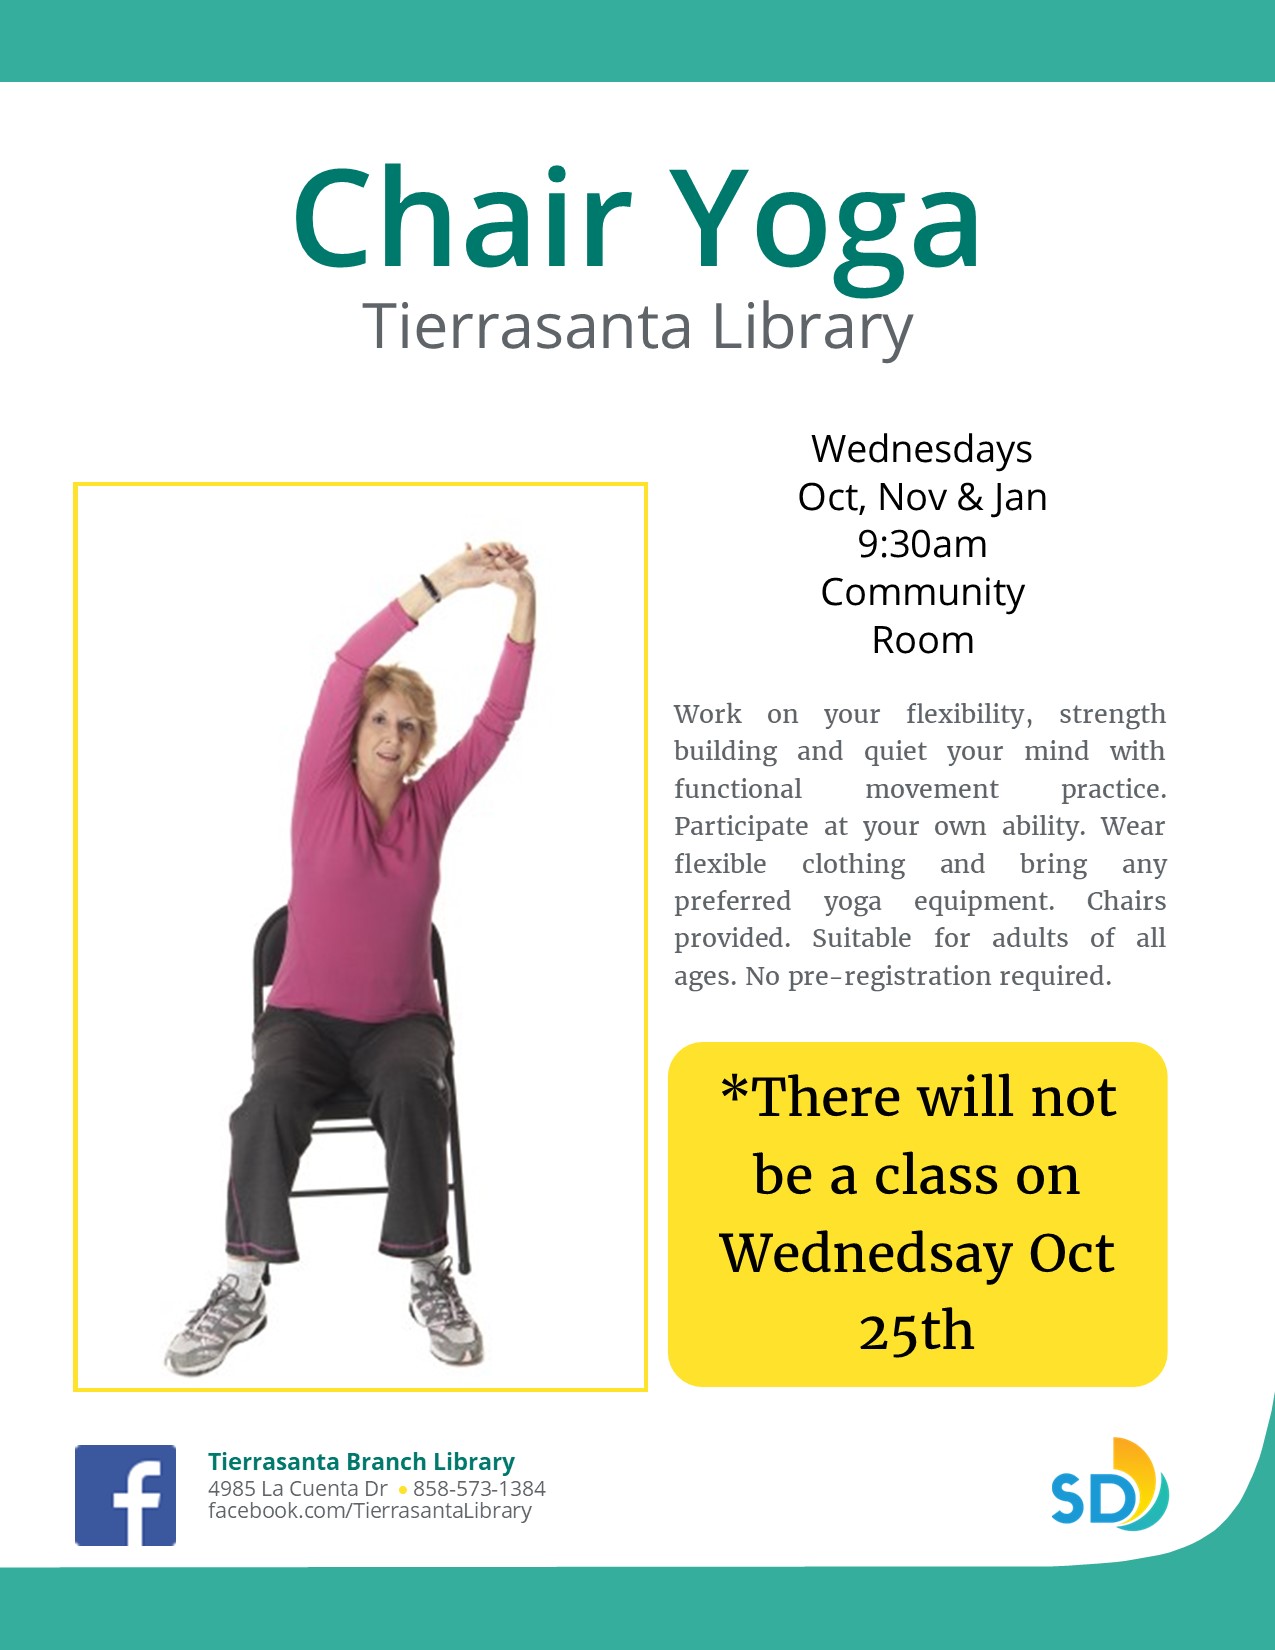 Flyer with the image of an older woman in a chair doing stretches